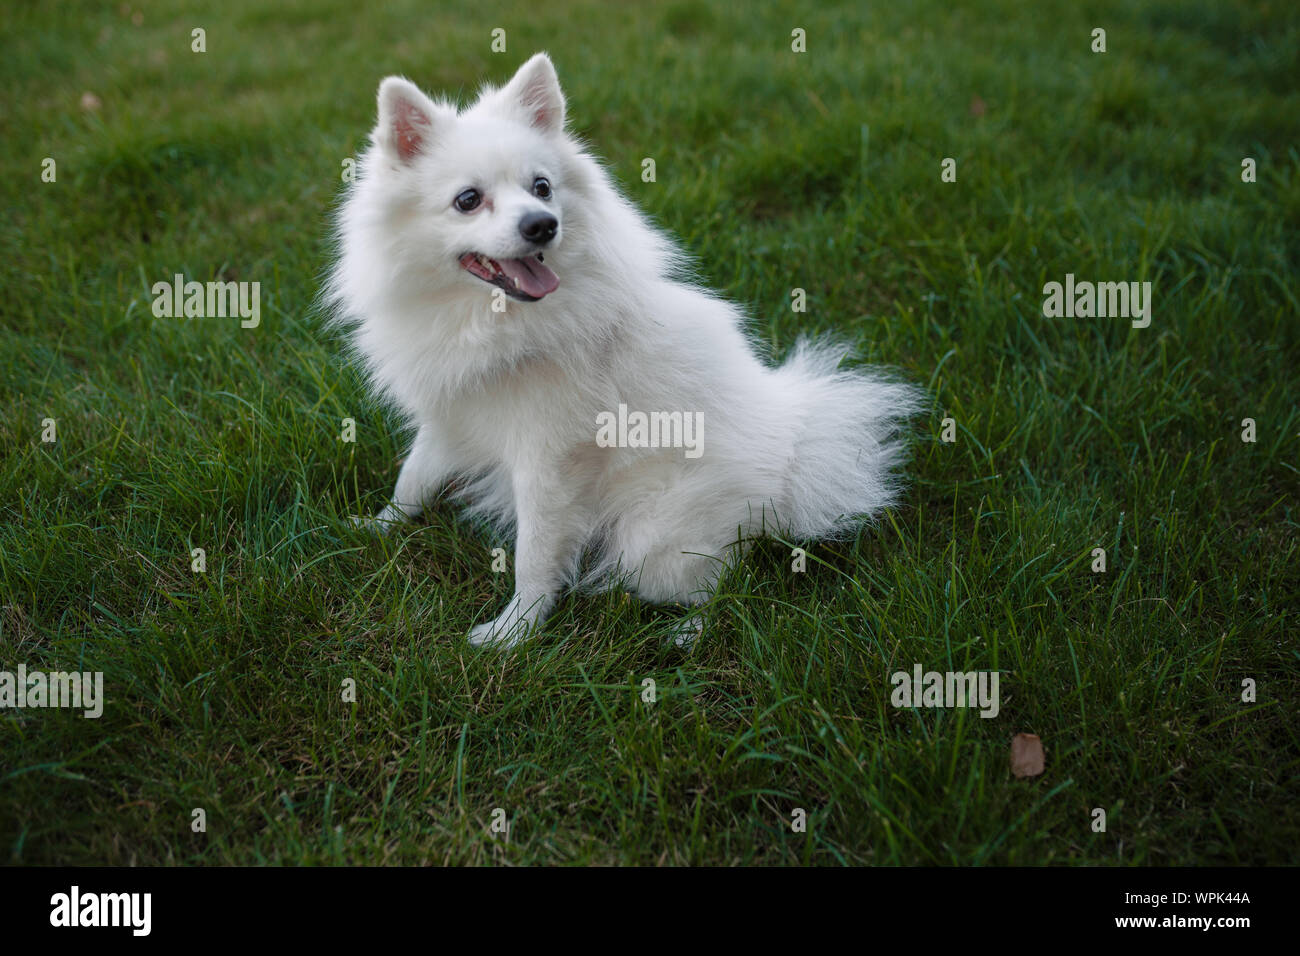 White Spitz For A Walk Cute Fluffy Puppy Of The German Spitz Pomeranian Plays For A Walk In Nature Stock Photo Alamy